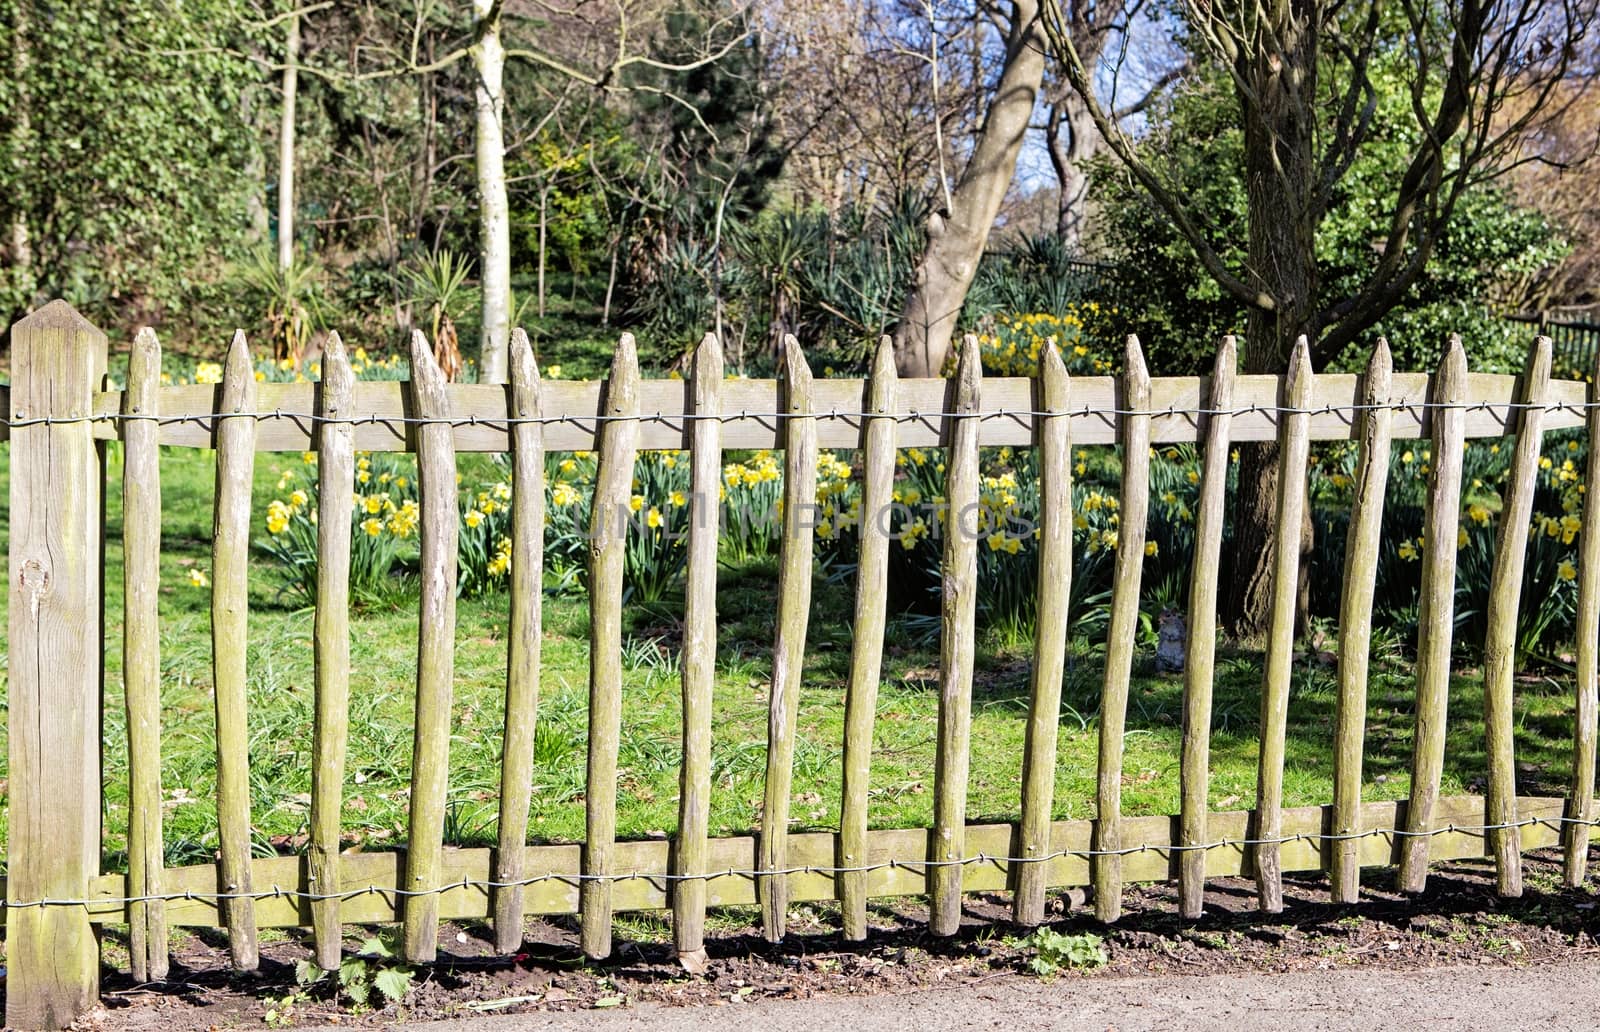 Old fence with wooden pickets in the park